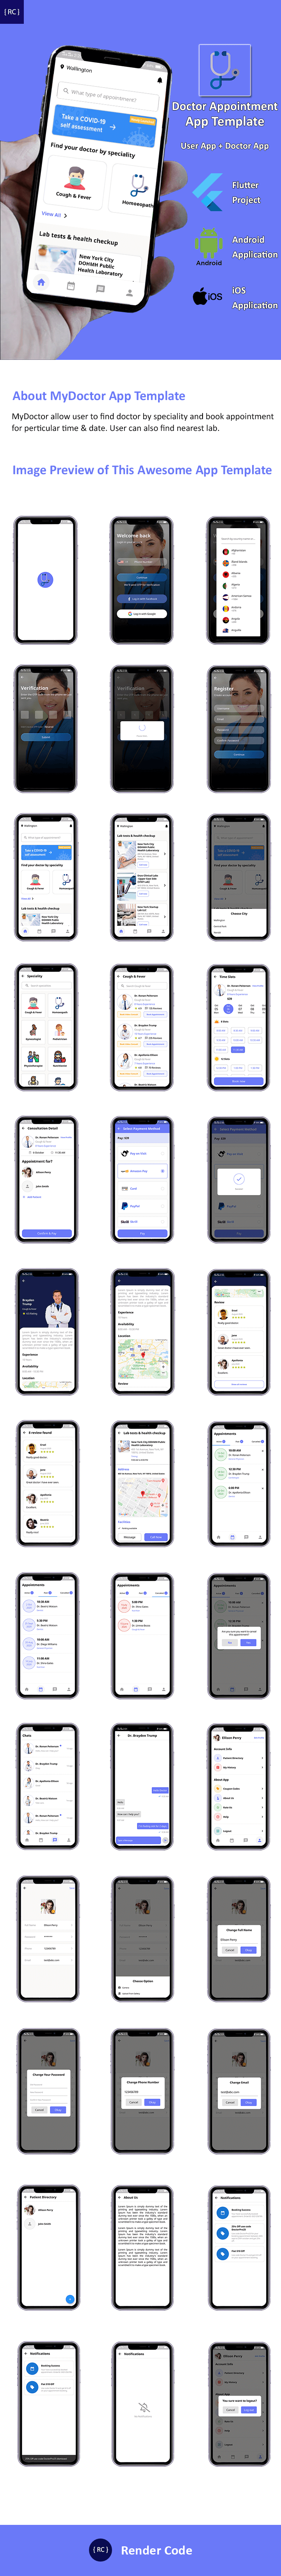 Doctor Appointment Booking Android App Template + iOS App Template | Flutter 3 | 4 Apps | DoctoHub - 9